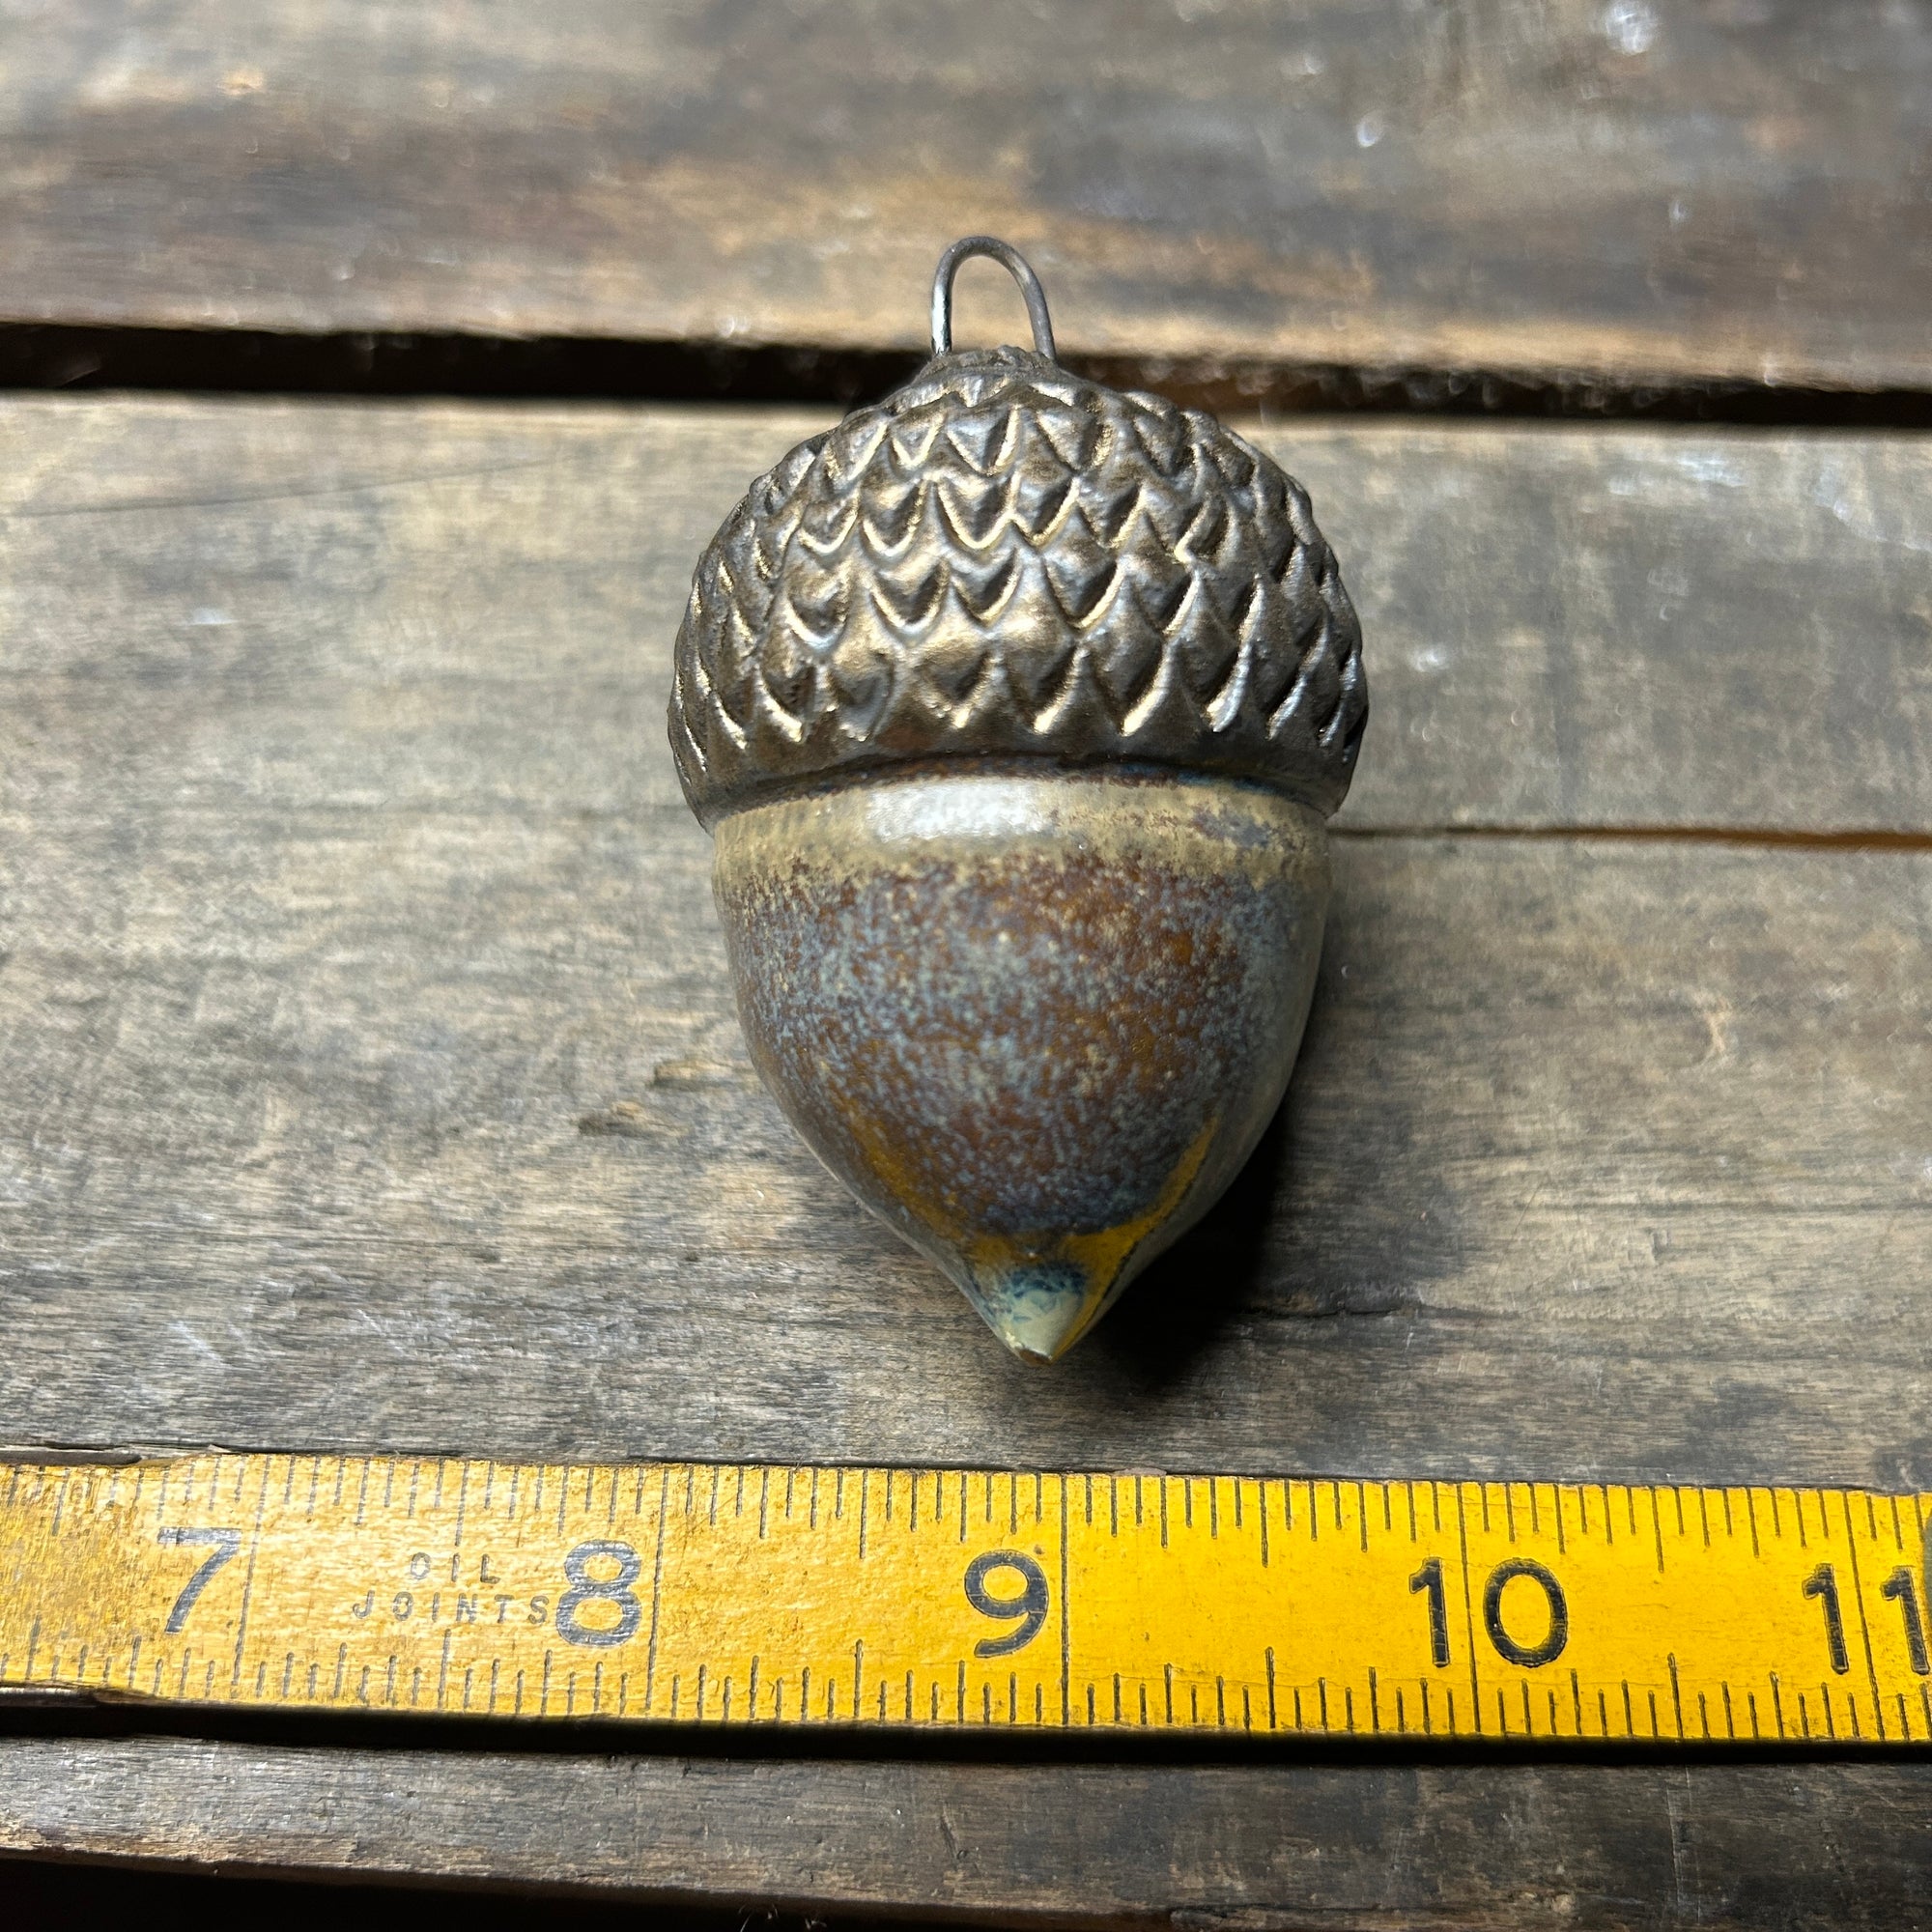 Ceramic Acorn - Brown with Blue  (A-1457)